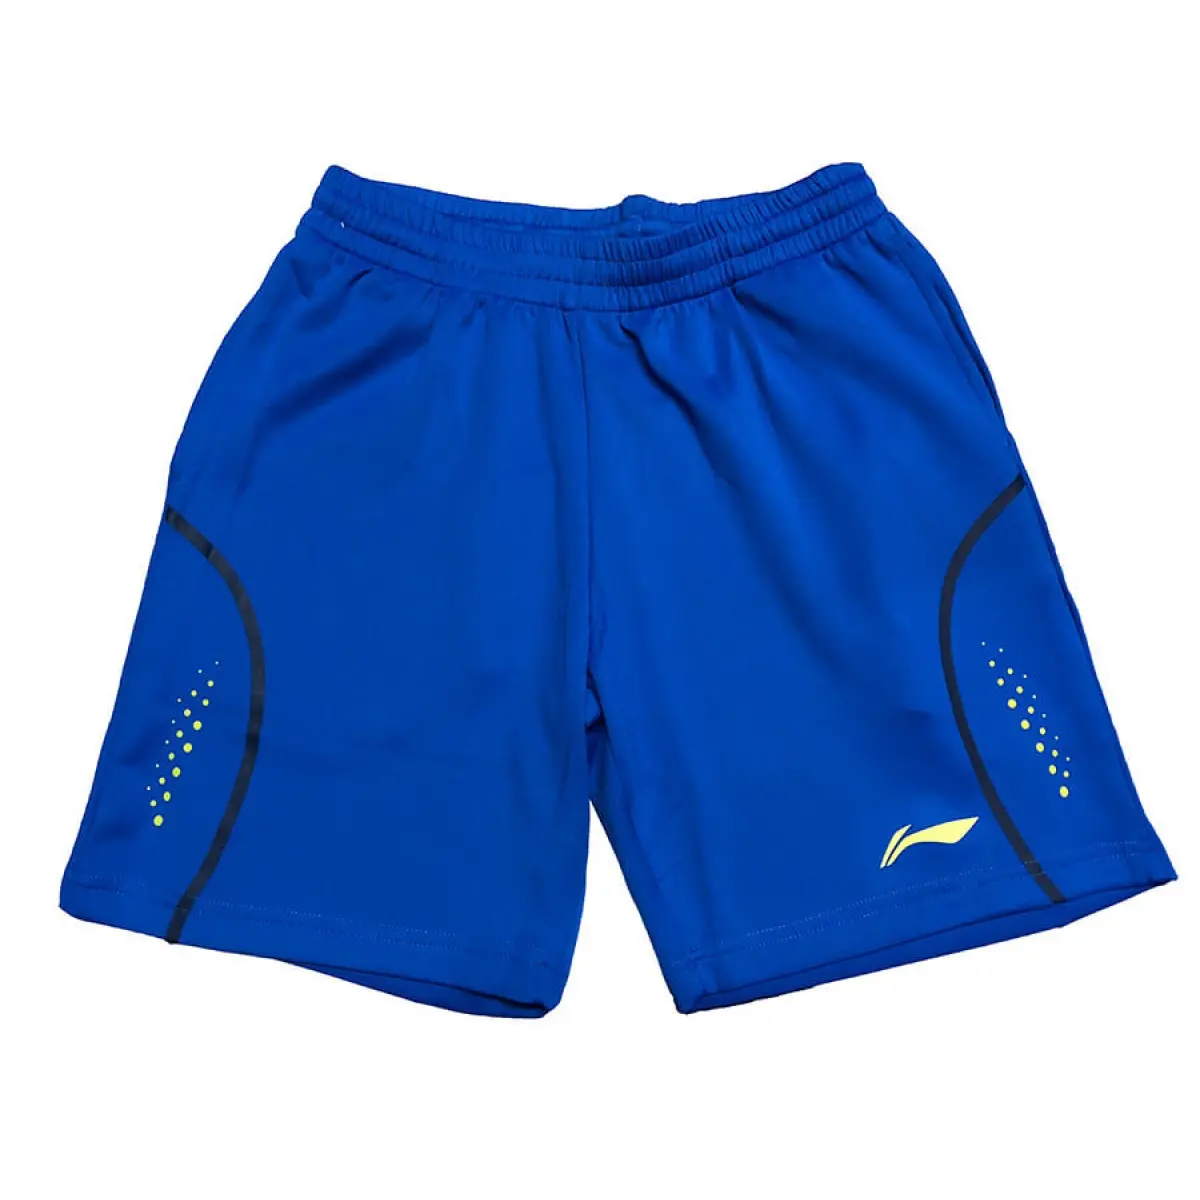 Buy Lining Moisture Management Mens Shorts at Lowest Prices - Sportsuncle